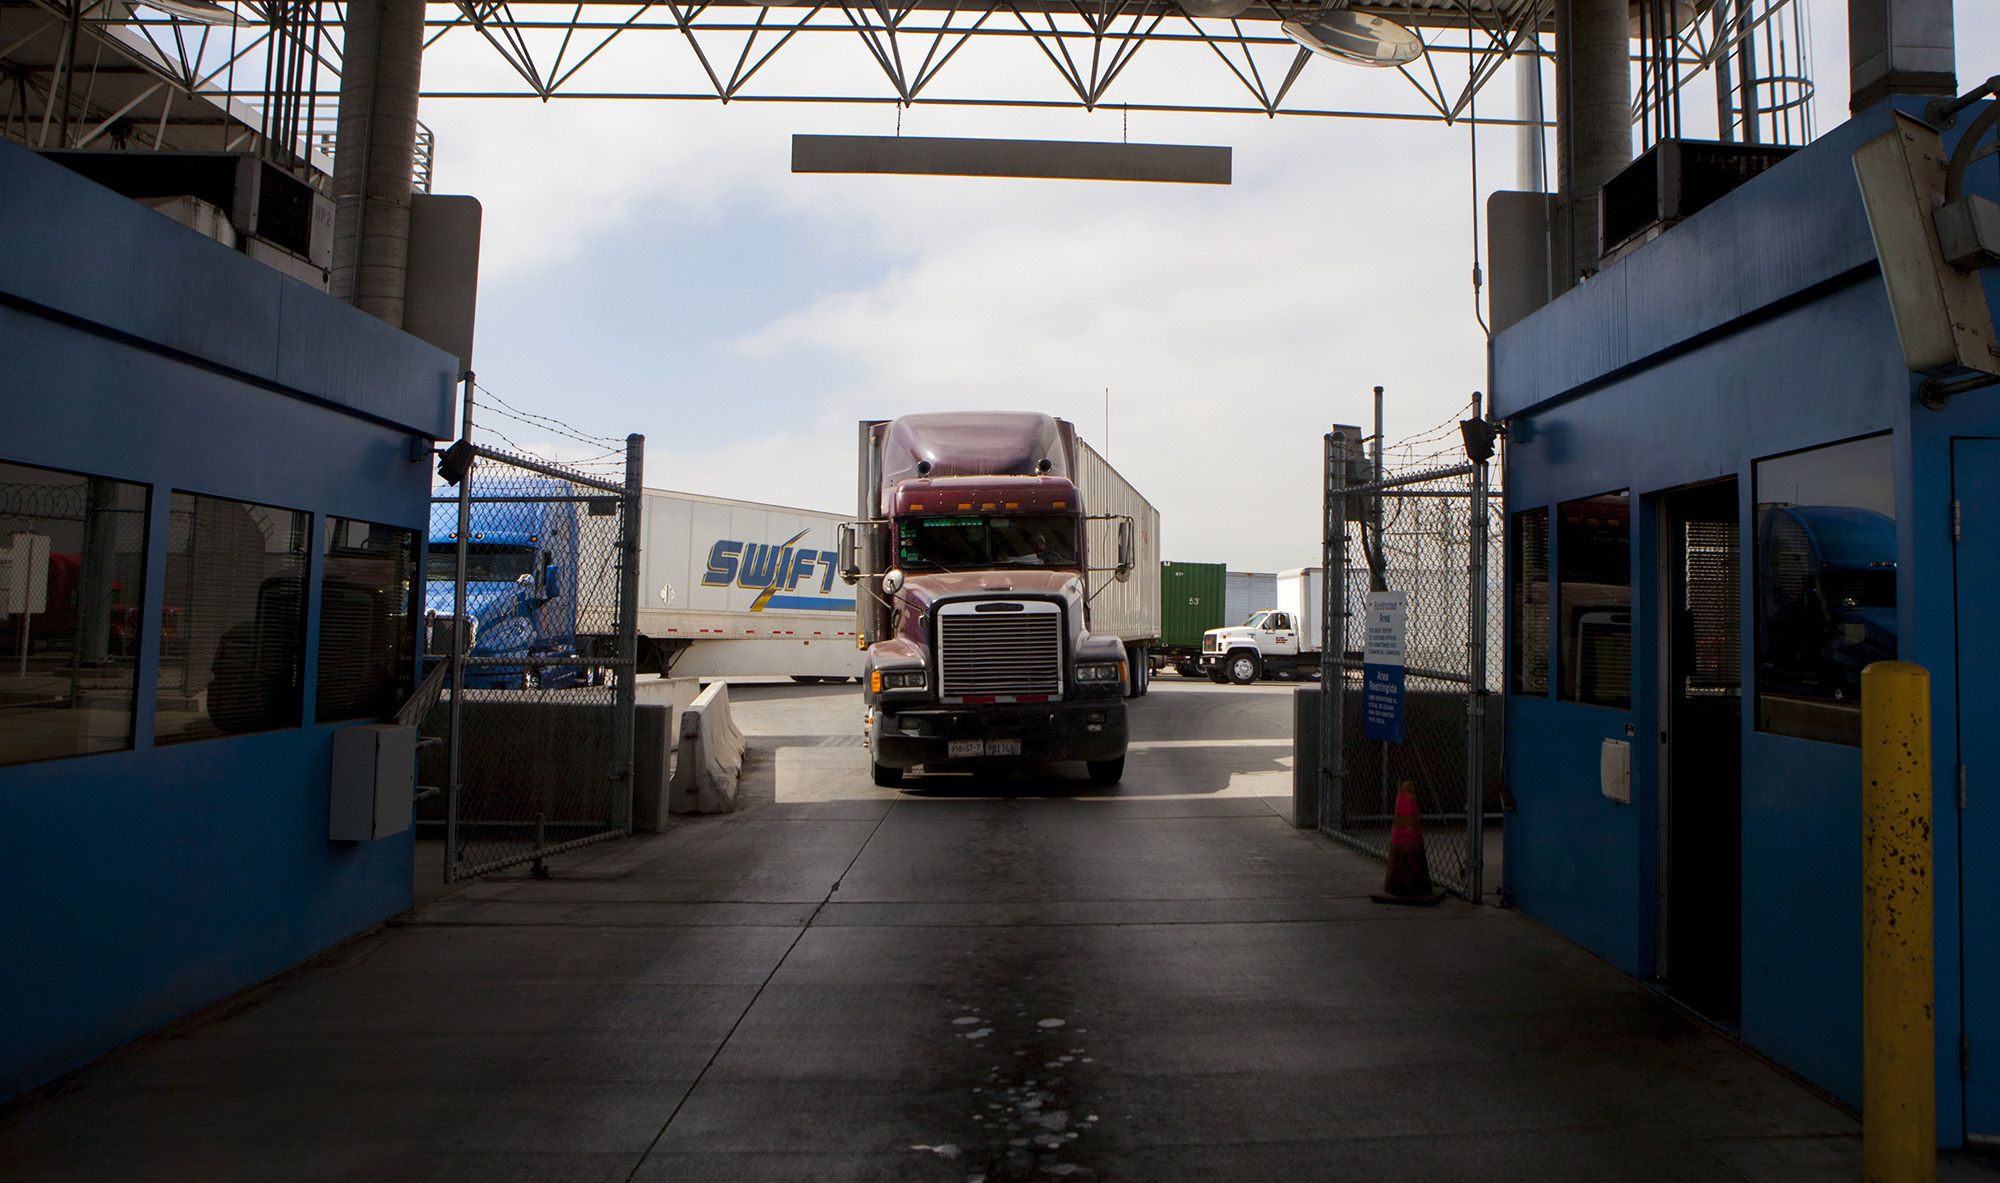 Truck drivers wait to speak to a U.S. Customs and Border Protection officer soon after arriving in the U.S. from Mexico at the Otay Mesa Port of Entry cargo facility in San Diego, California, U.S., on Friday, June 7, 2013. Mexico reported a revised trade deficit of $1.2 Billion for April, the national statistics agency, known as Inegi, said on its website. Photographer: Sam Hodgson/Bloomberg